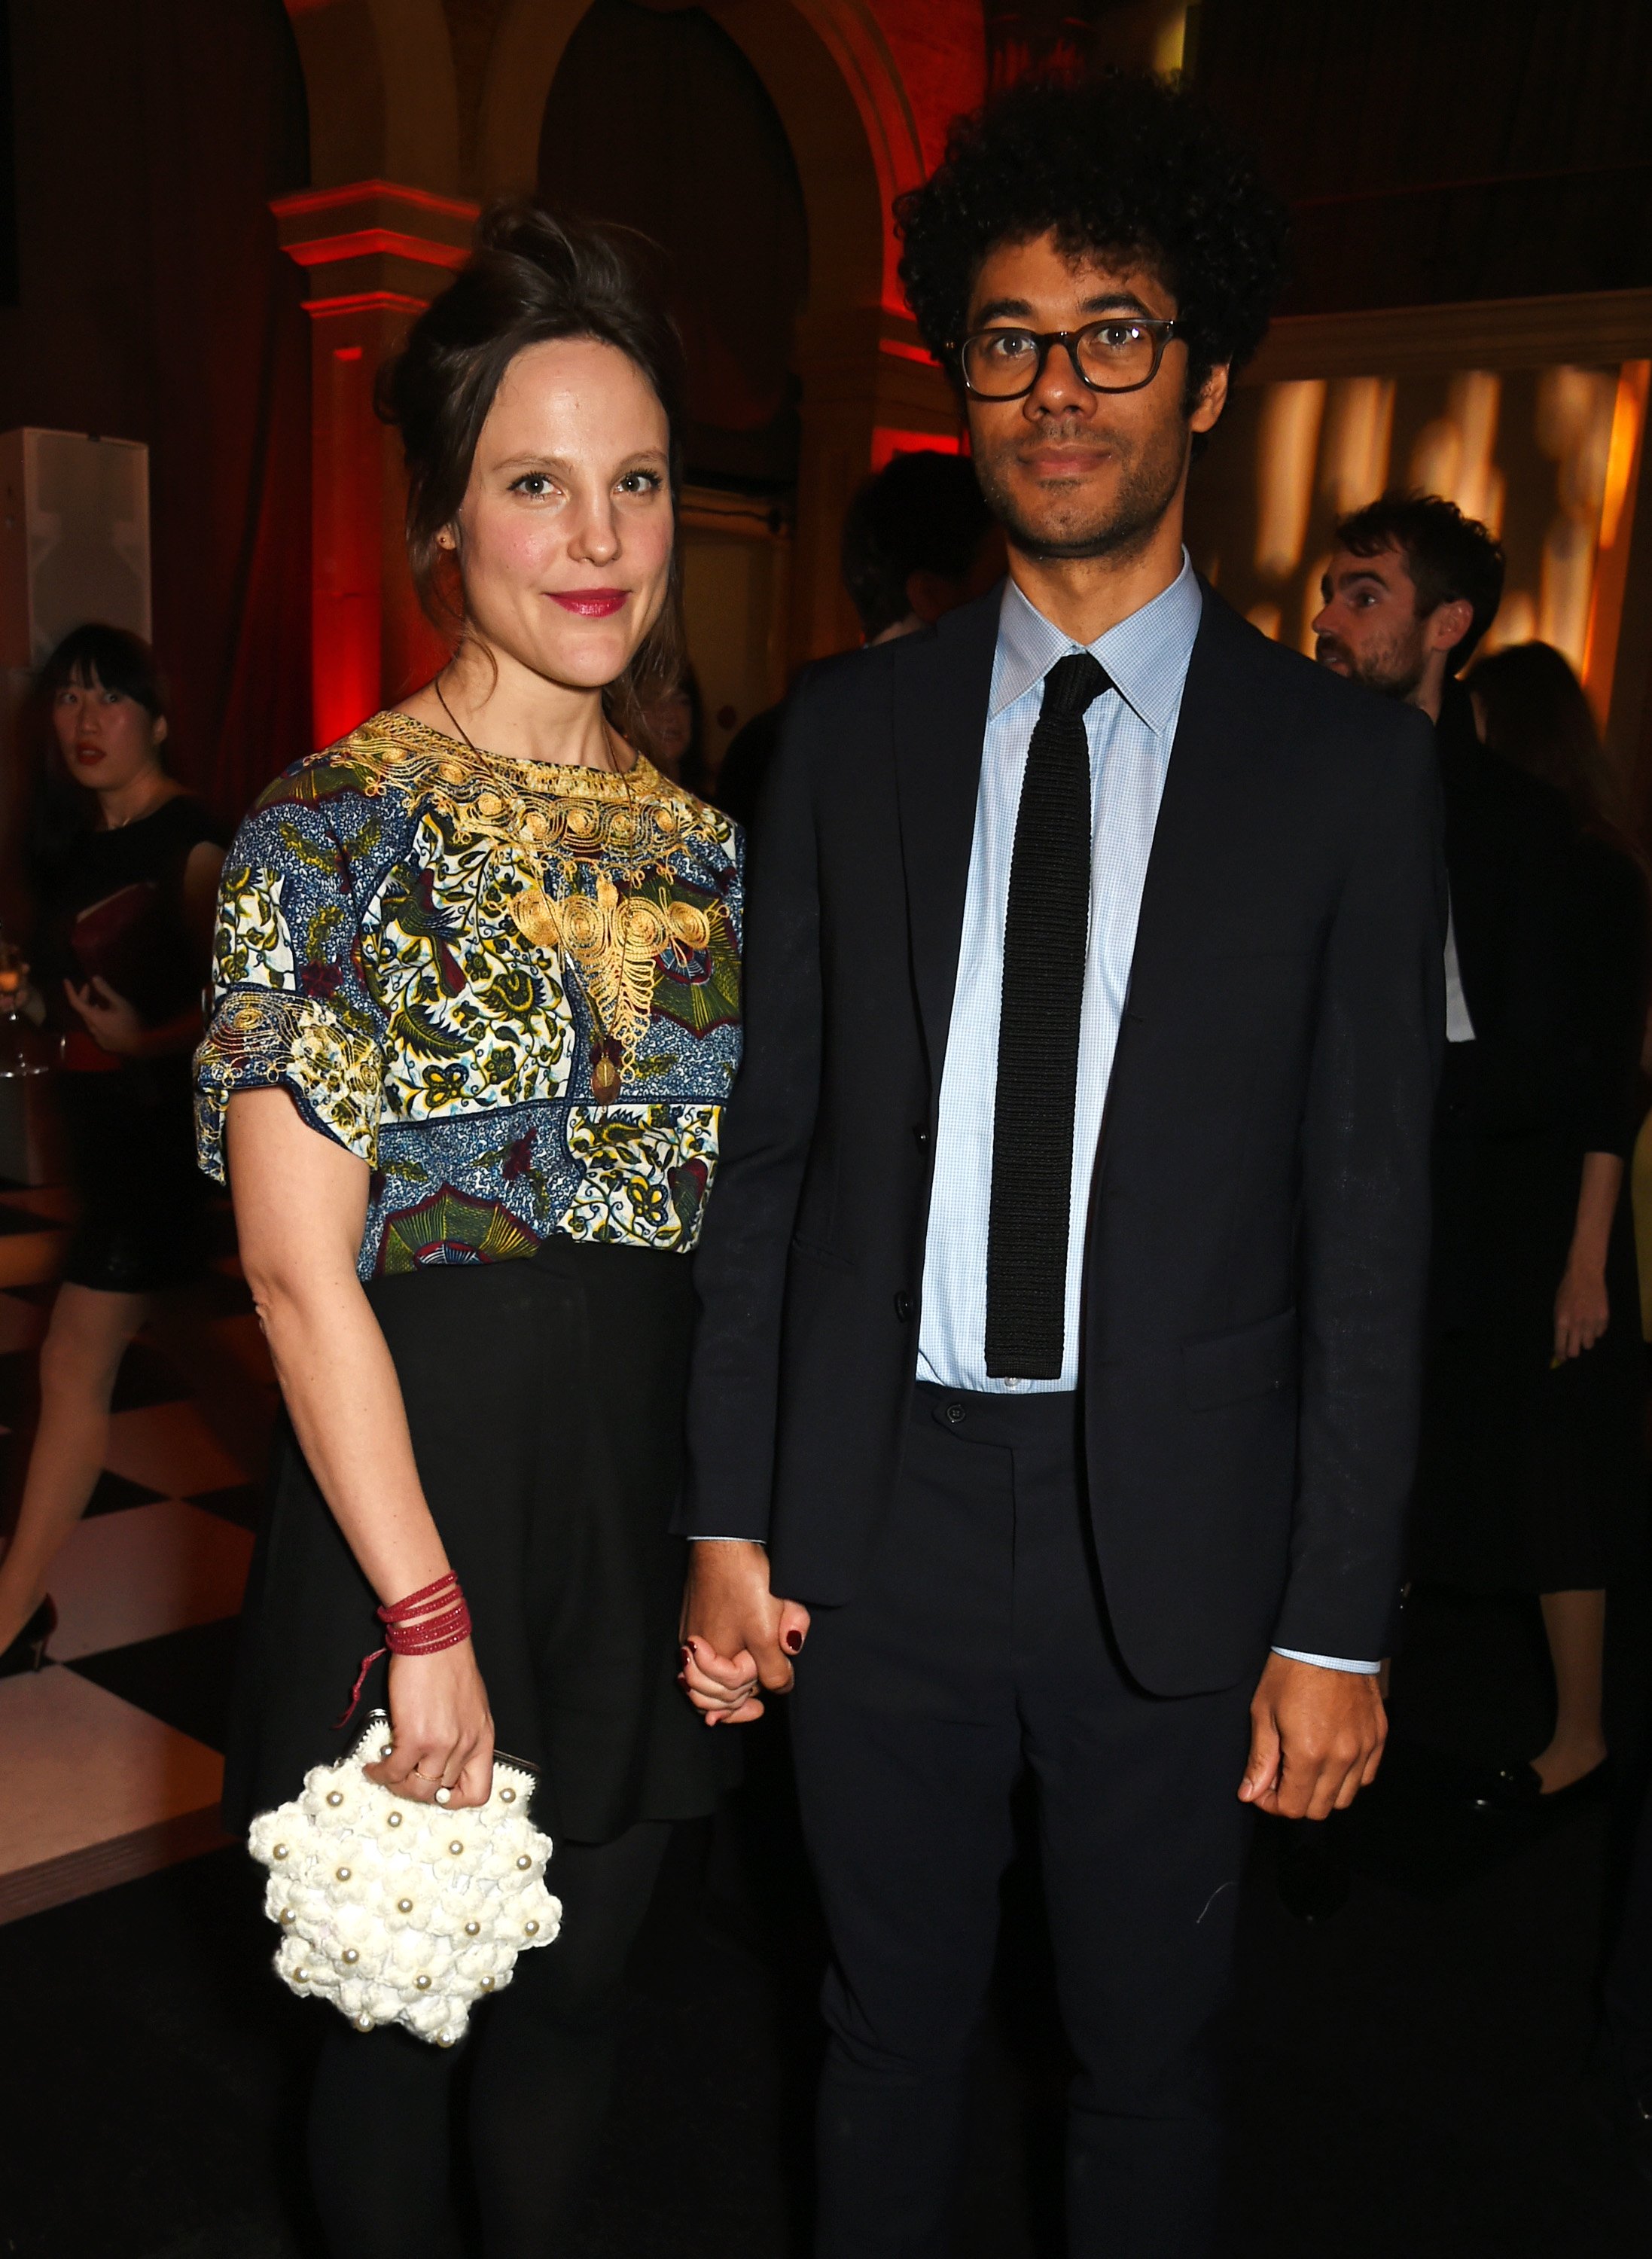 Lydia Fox and Richard Ayoade at the Moet British Independent Film Awards 2015 on December 6, 2015, in London | Source: Getty Images